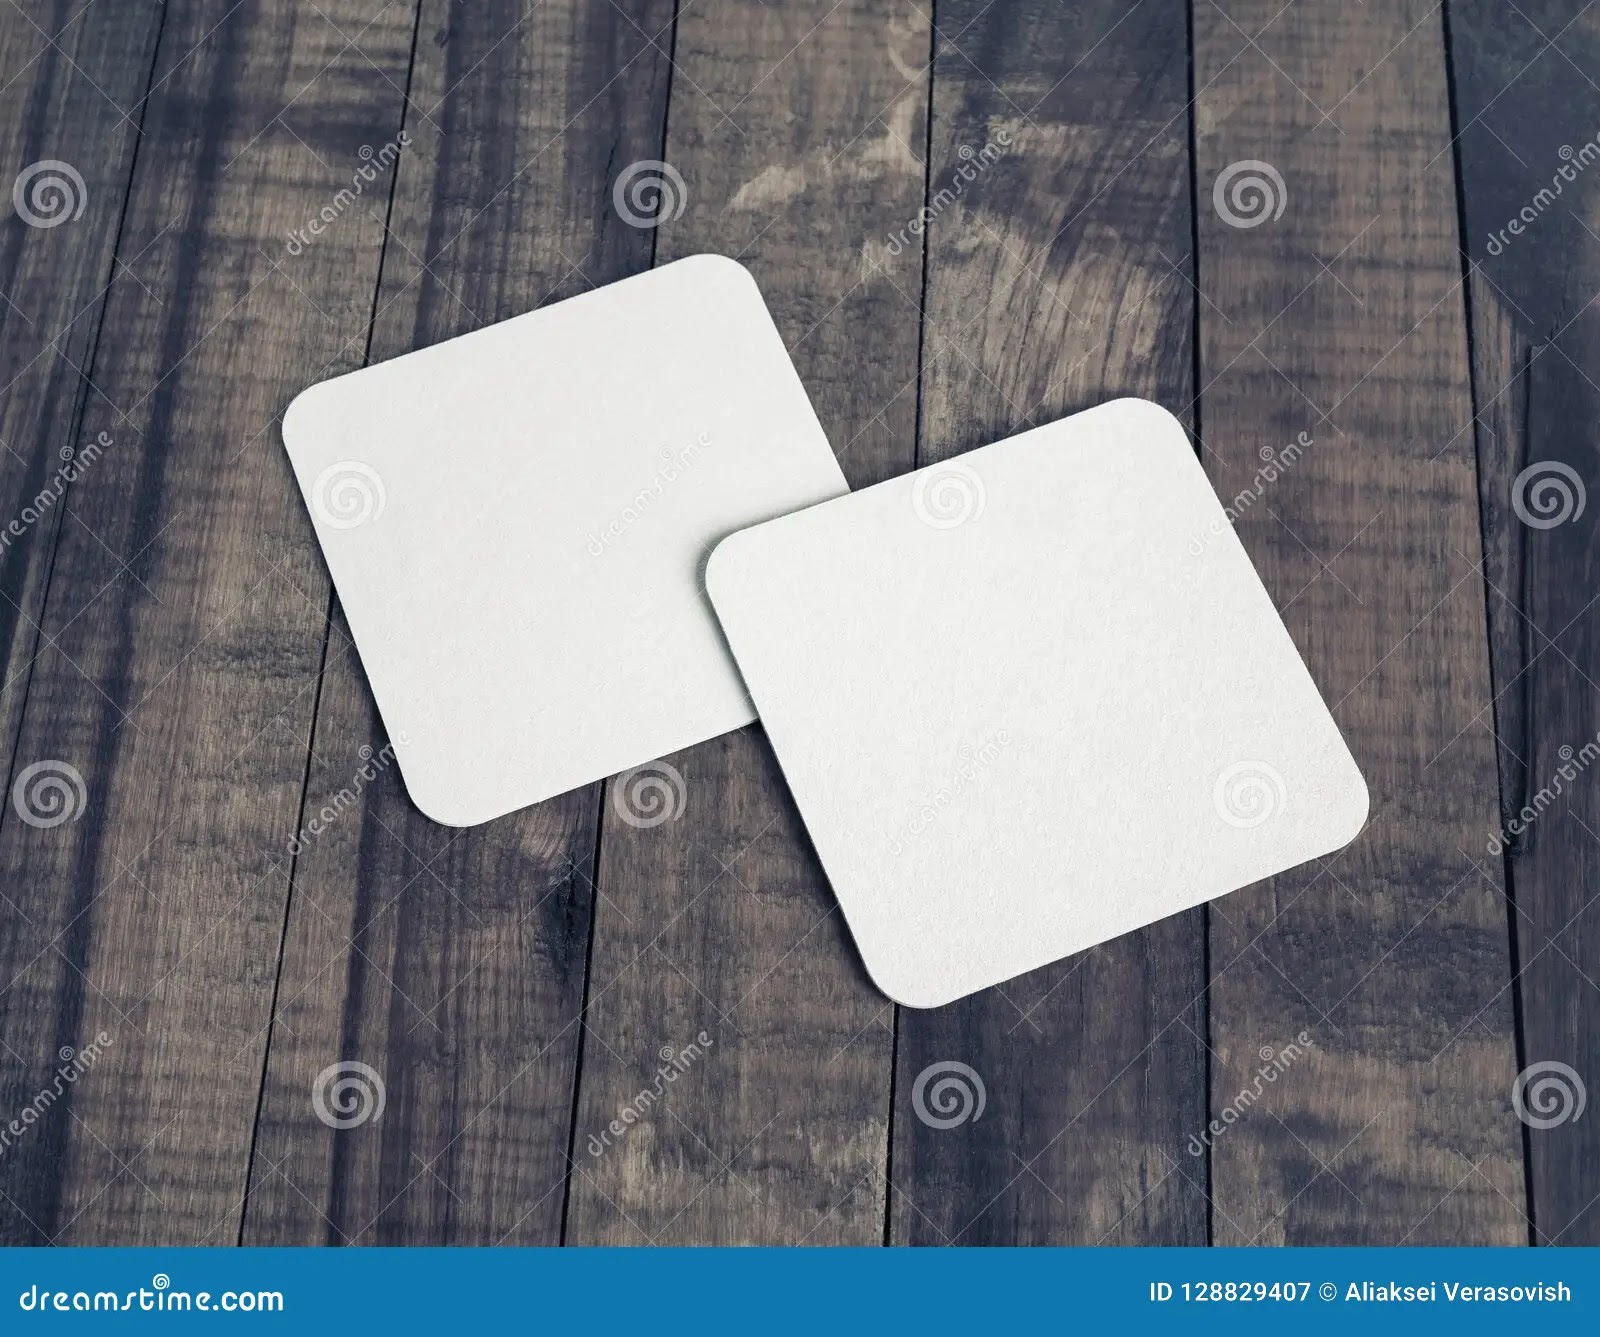 Two beer coasters stock image. Image of branding, protect 128829407